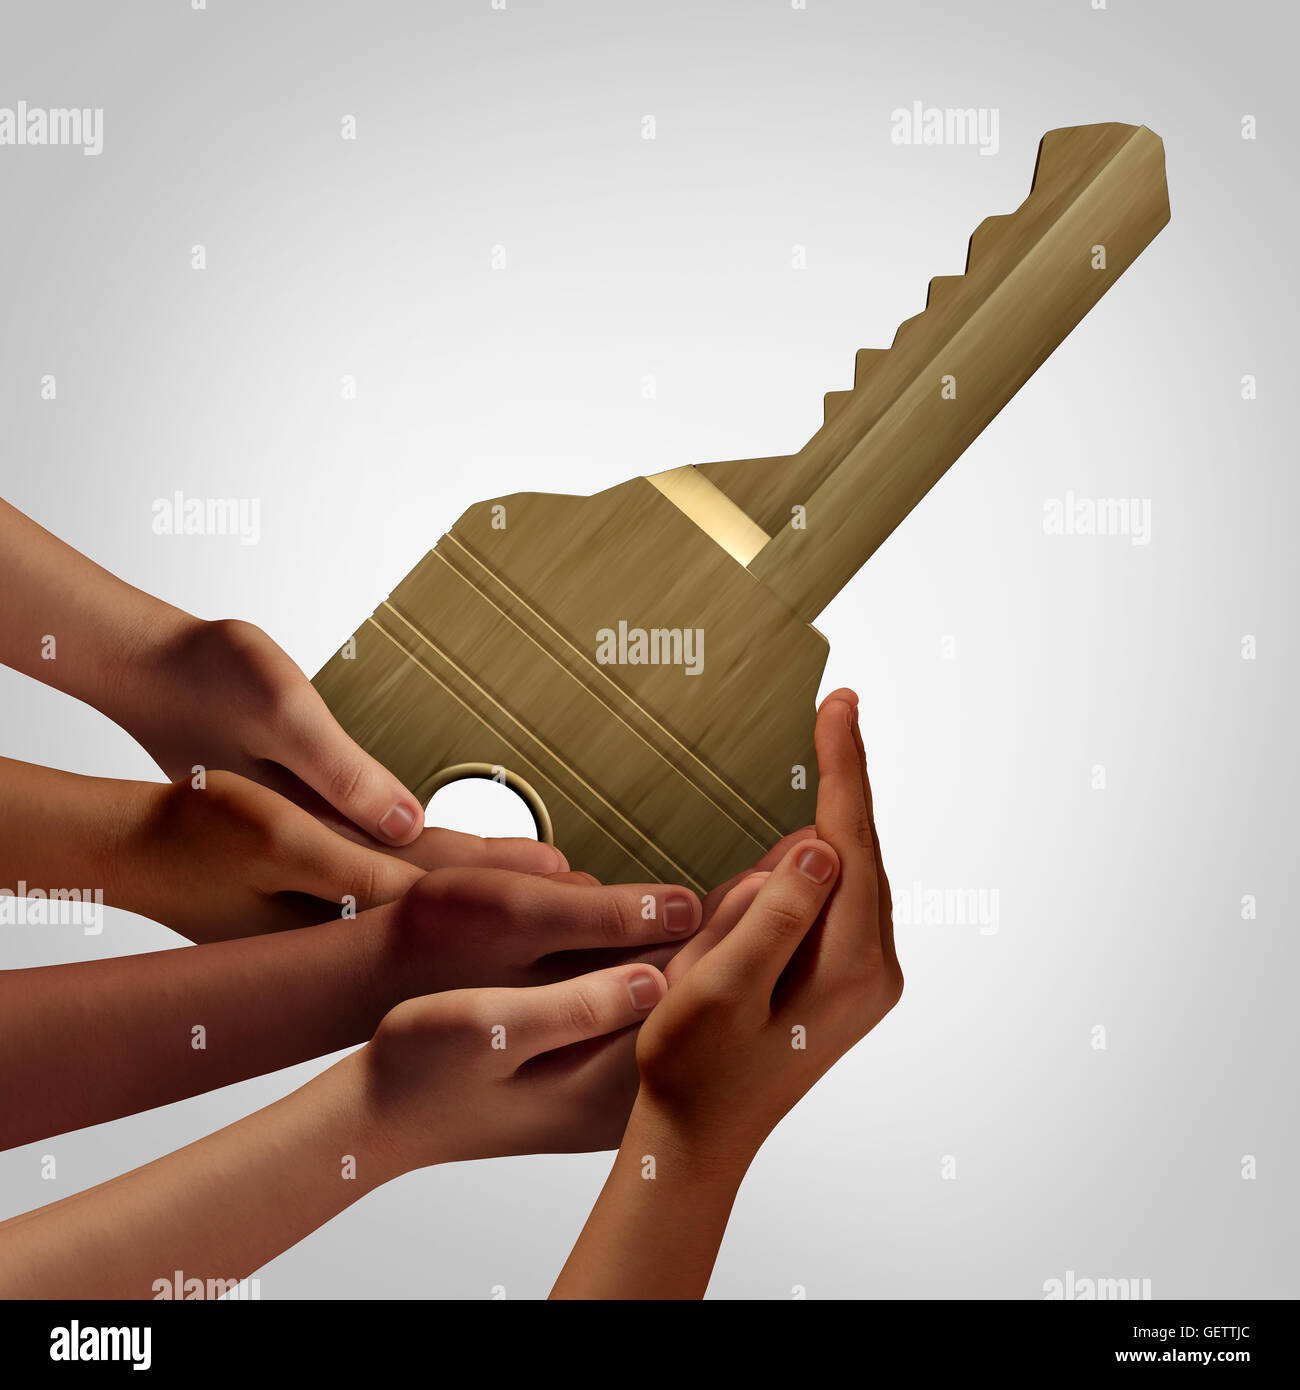 People group key access concept as diverse hands holding an object that unlocks as a teamwork solution metaphor or allowing accessibility symbol with 3D illustration elements. Stock Photo